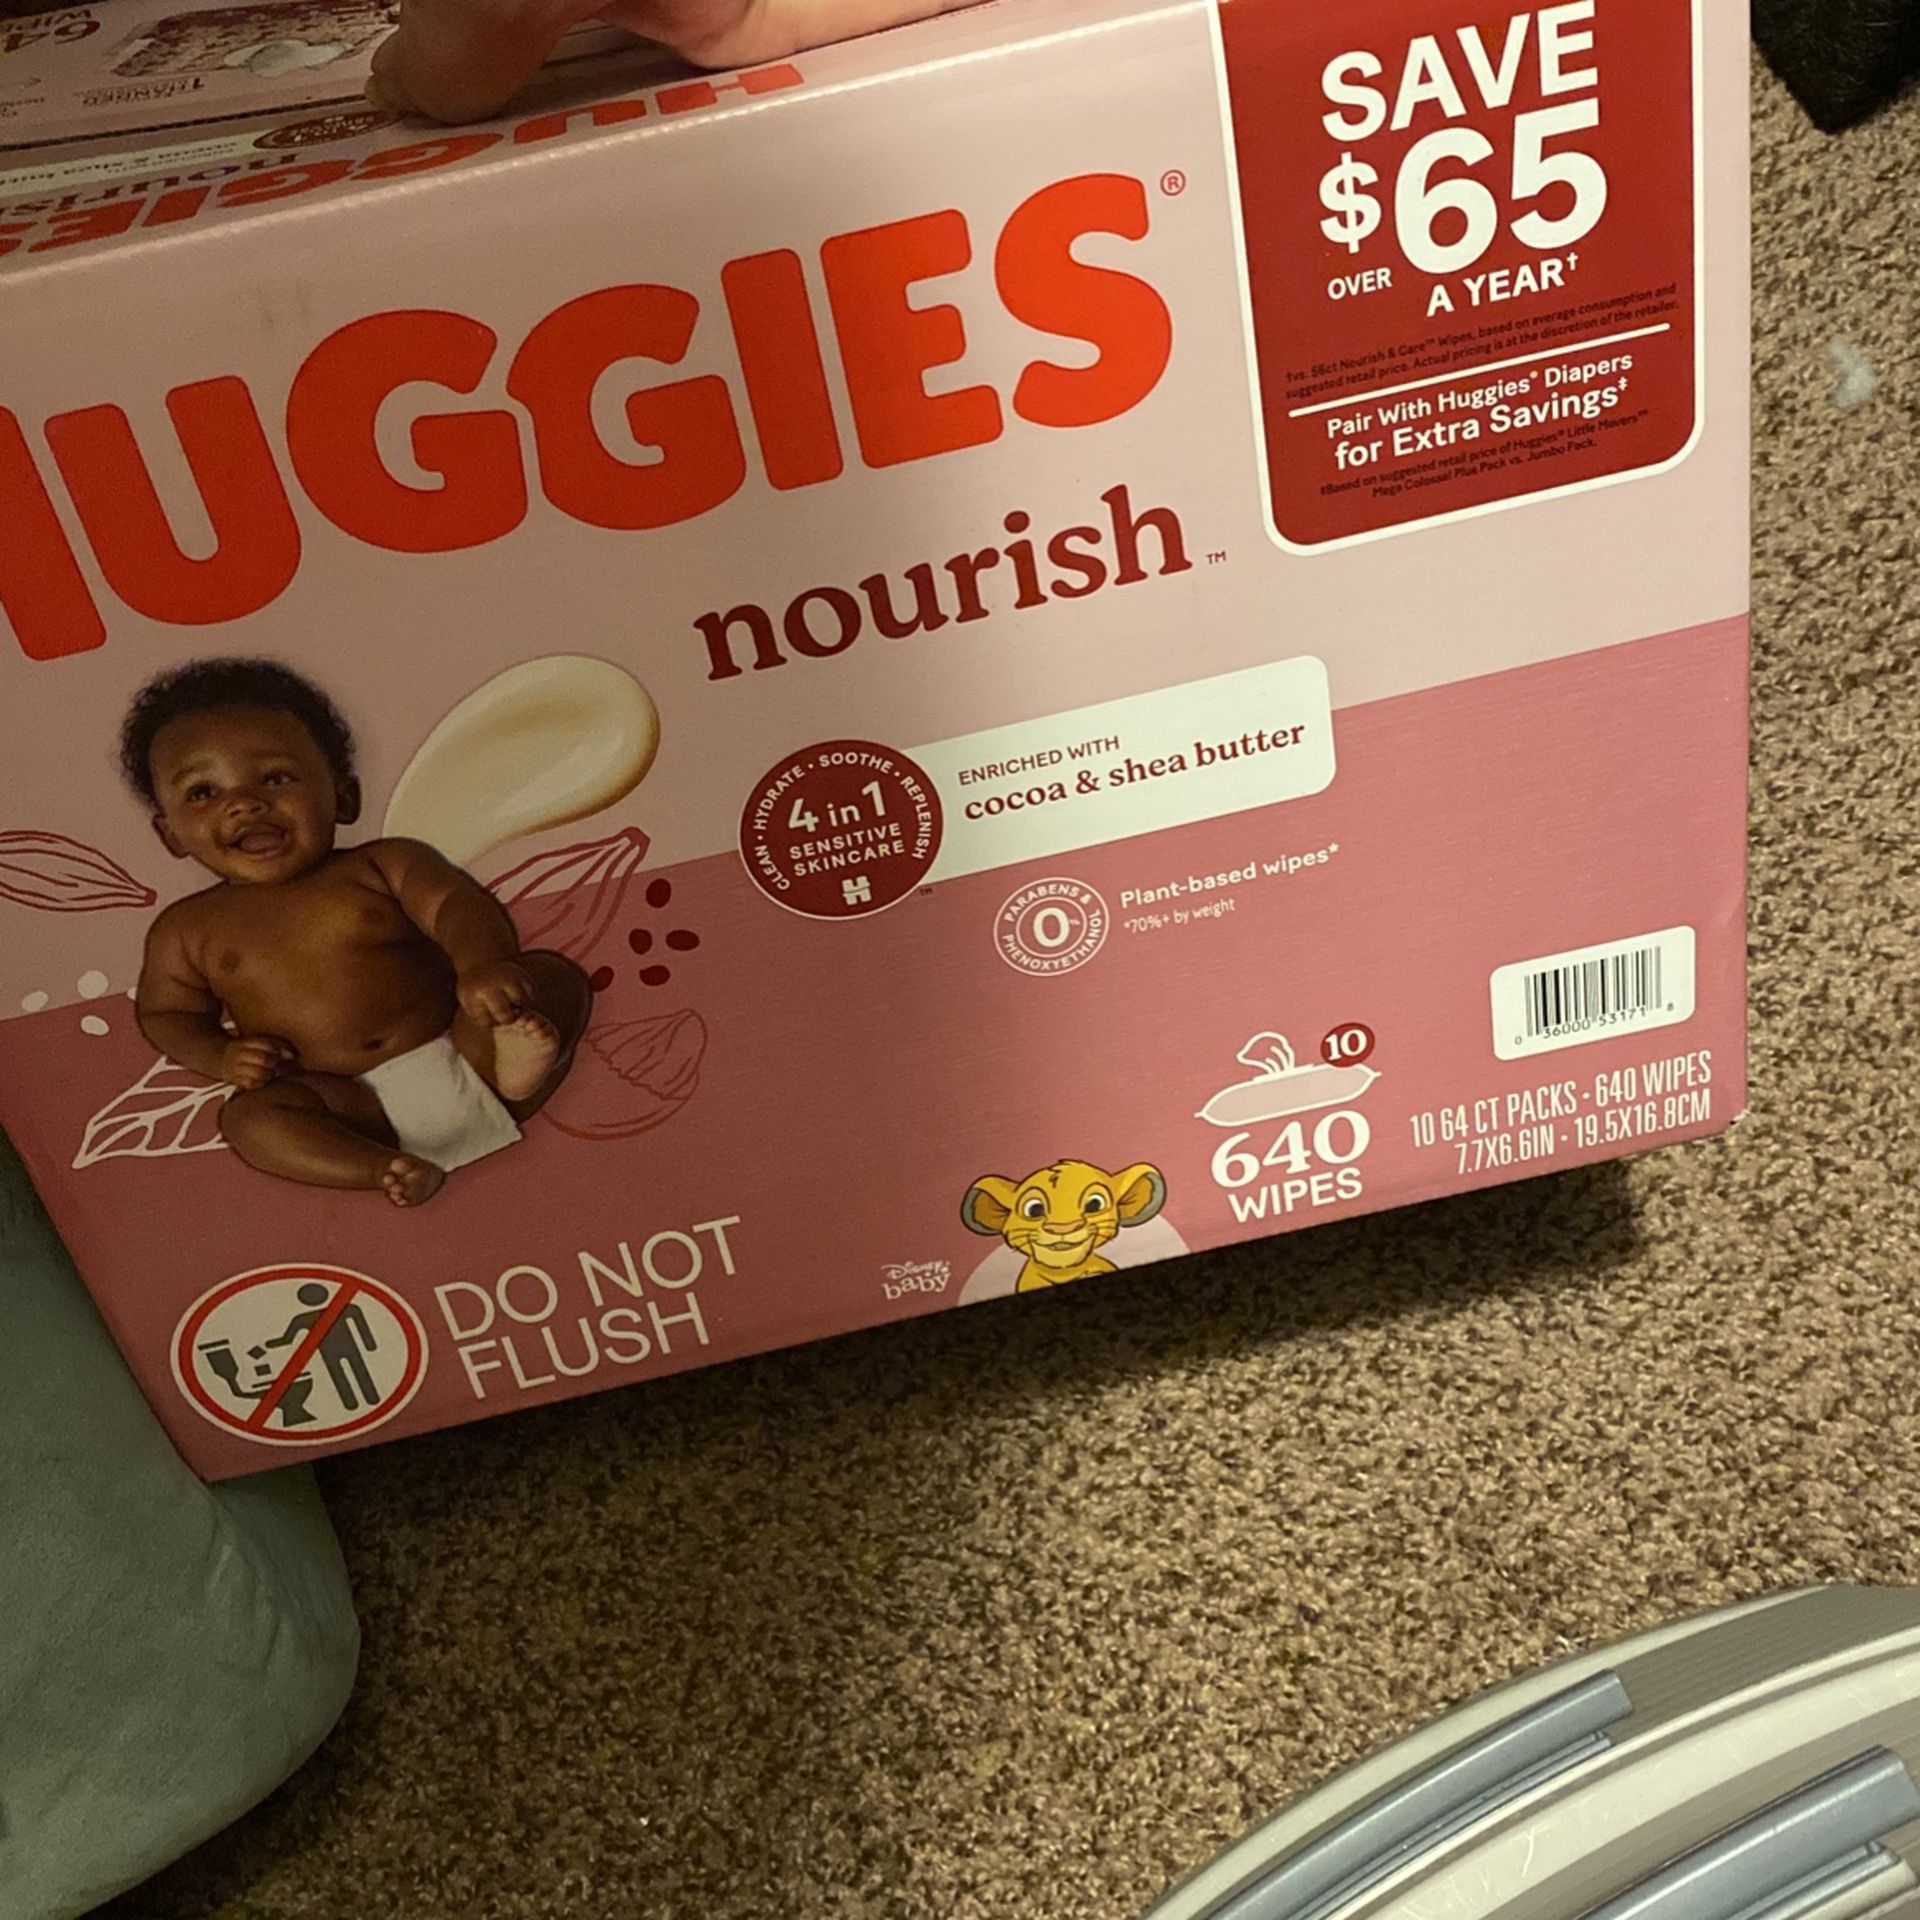 huggie nourish wipes cocoa and shea butter 640 count